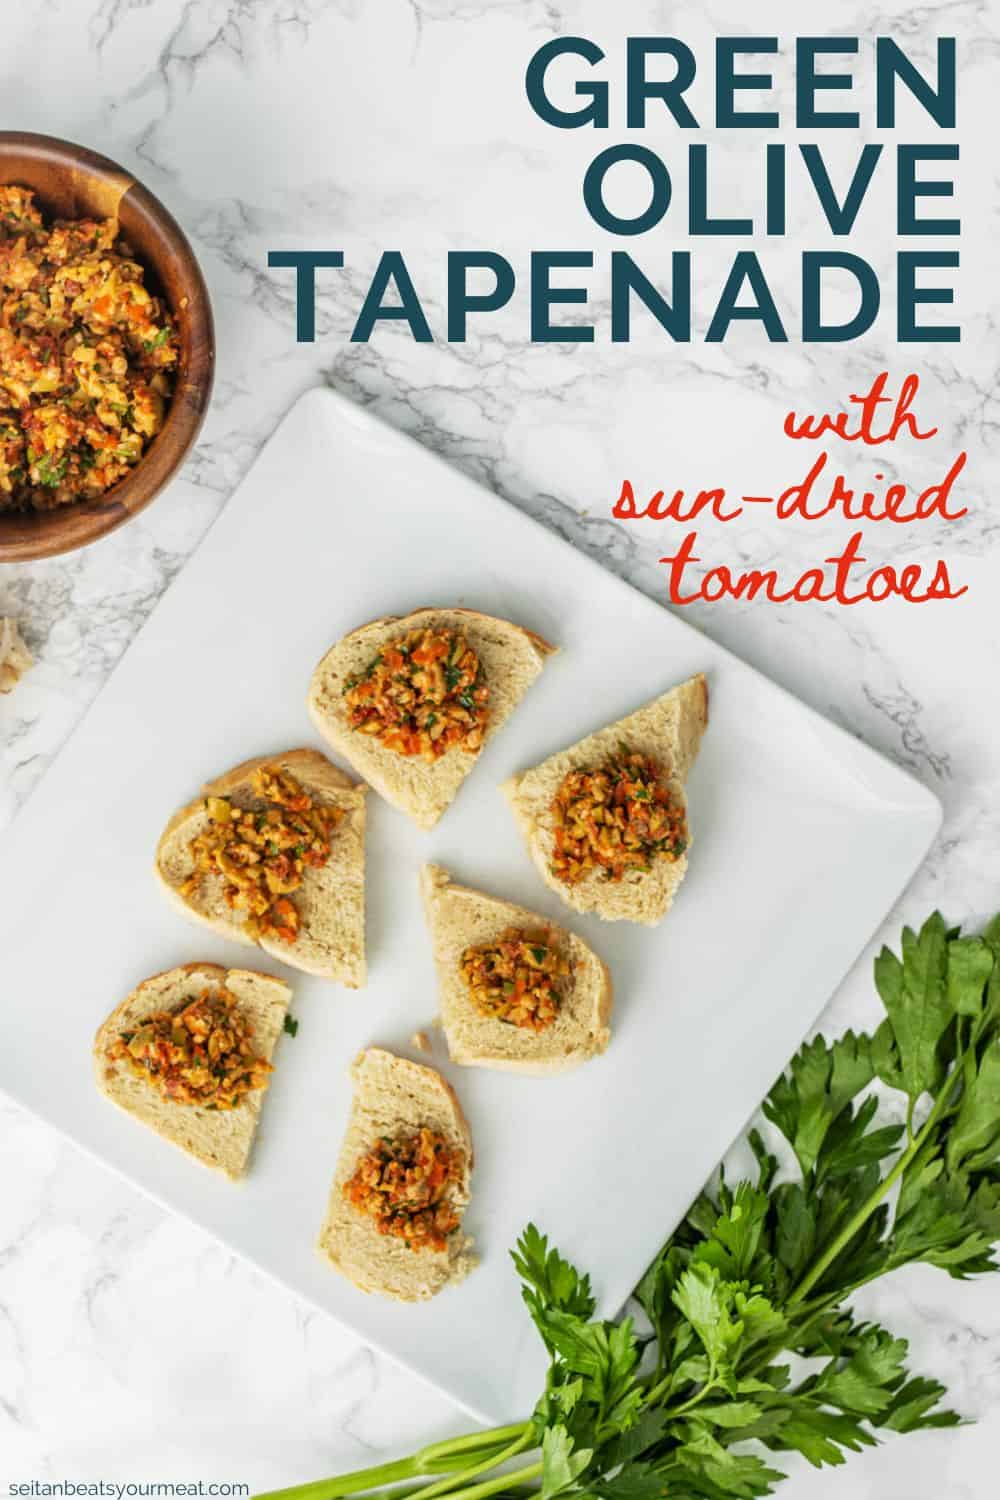 Sun-dried tomato green olive tapenade on small slices of bread on plate with text "Green Olive Tapenade with Sun-Dried Tomatoes"